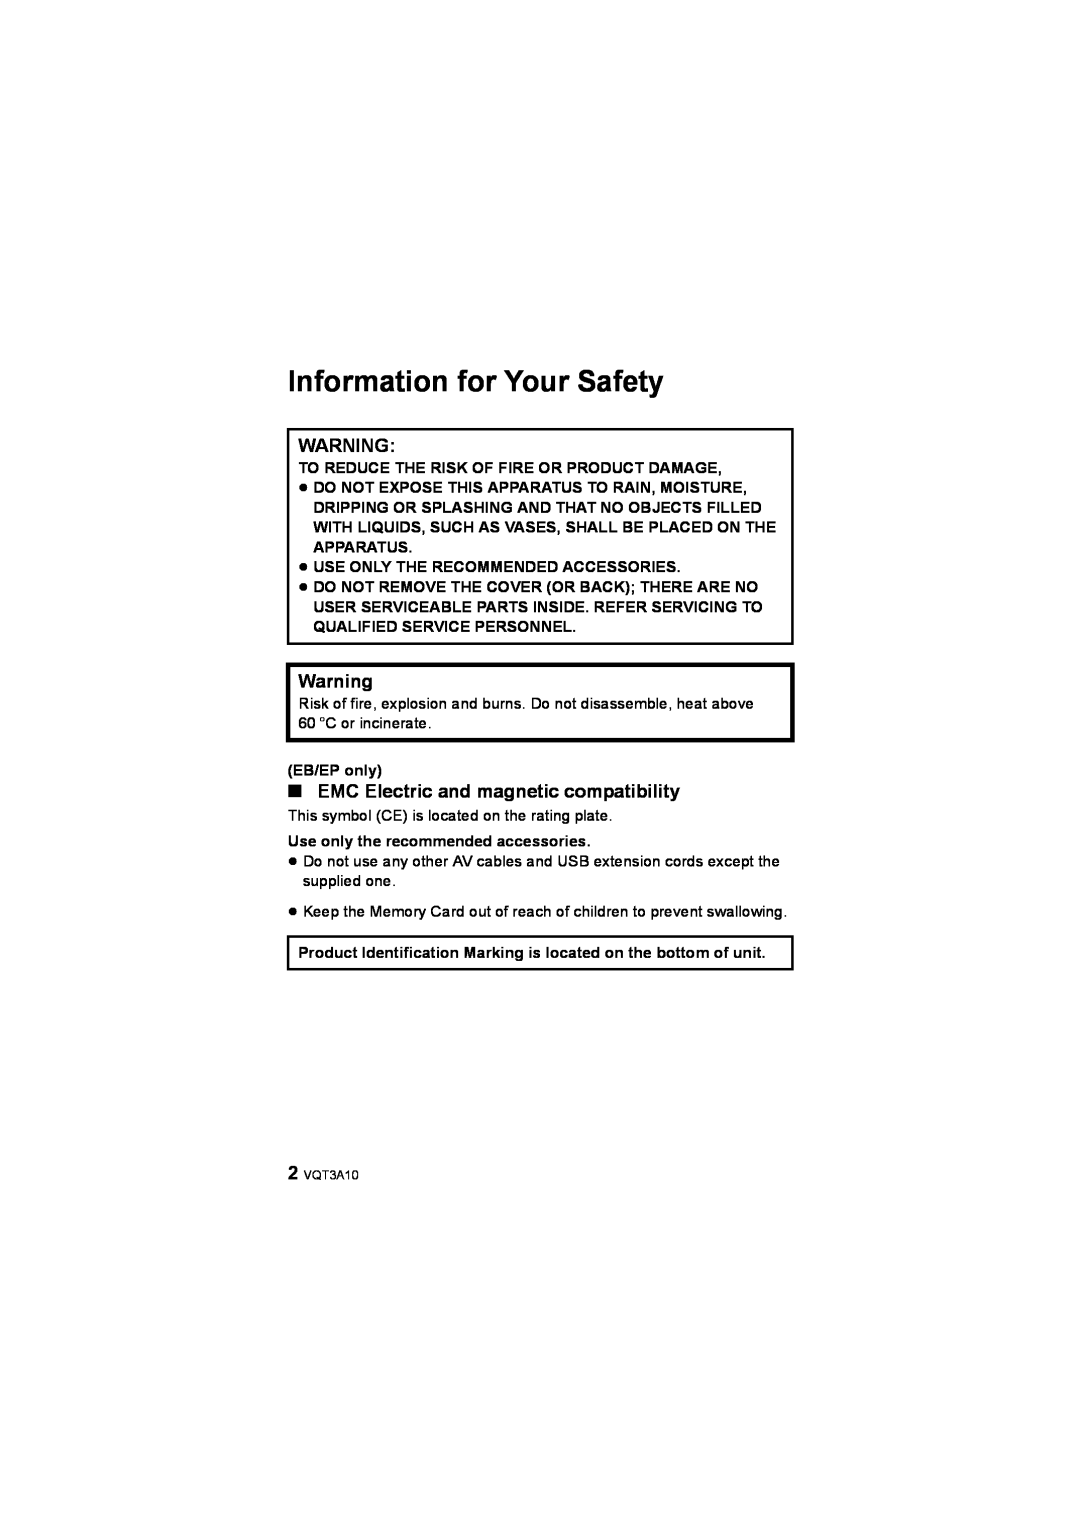 Panasonic HM-TA1 operating instructions Information for Your Safety, ∫ EMC Electric and magnetic compatibility, EB/EP only 